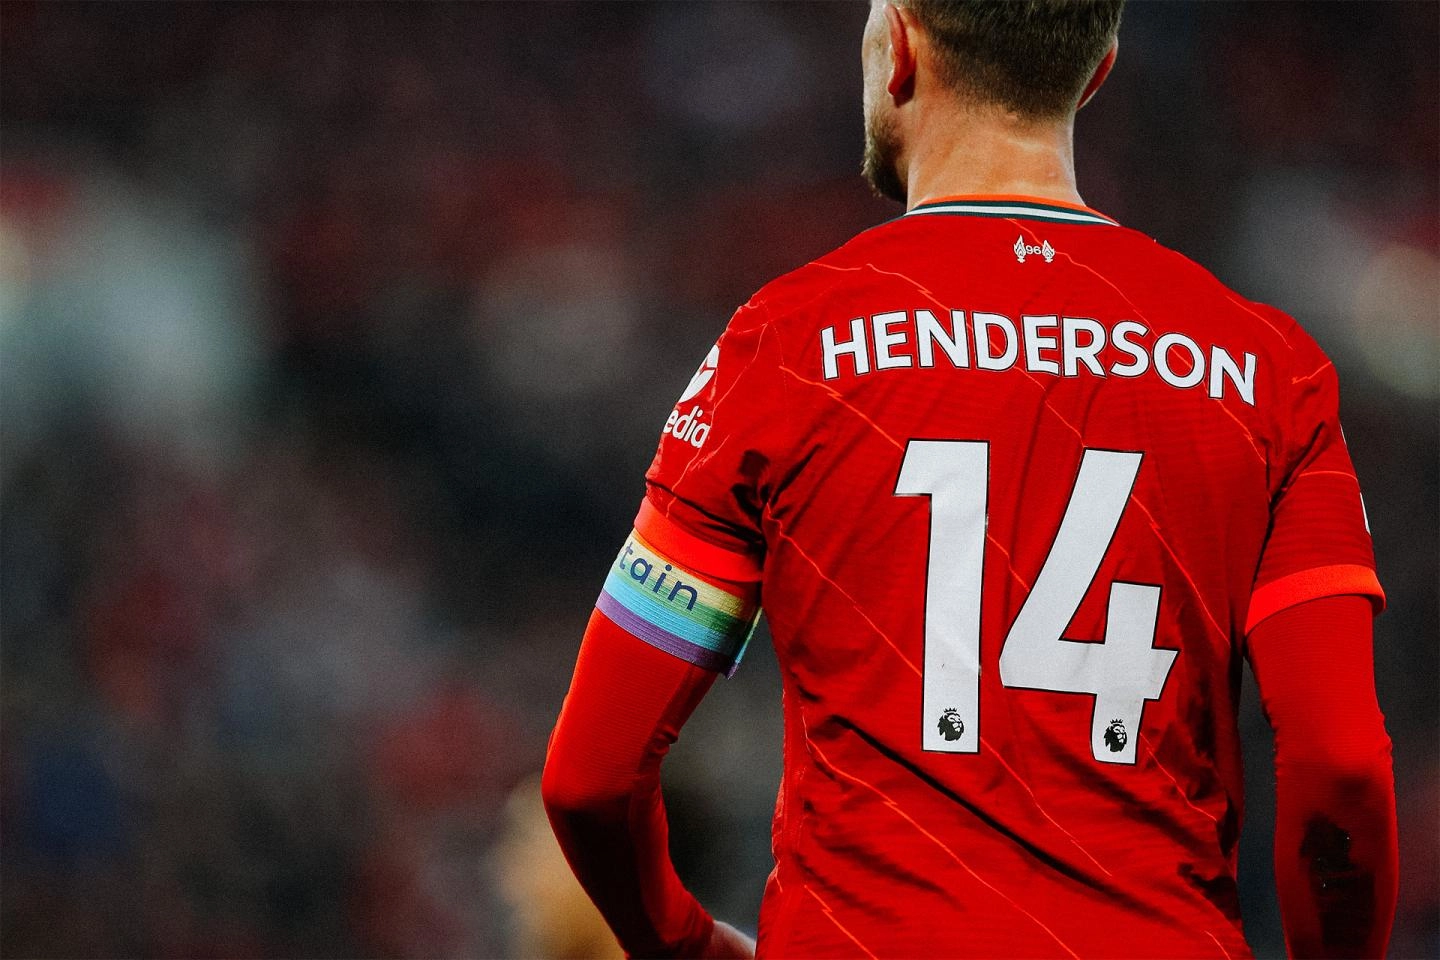 Jordan Henderson proudly displays allyship with the Rainbow Laces campaign